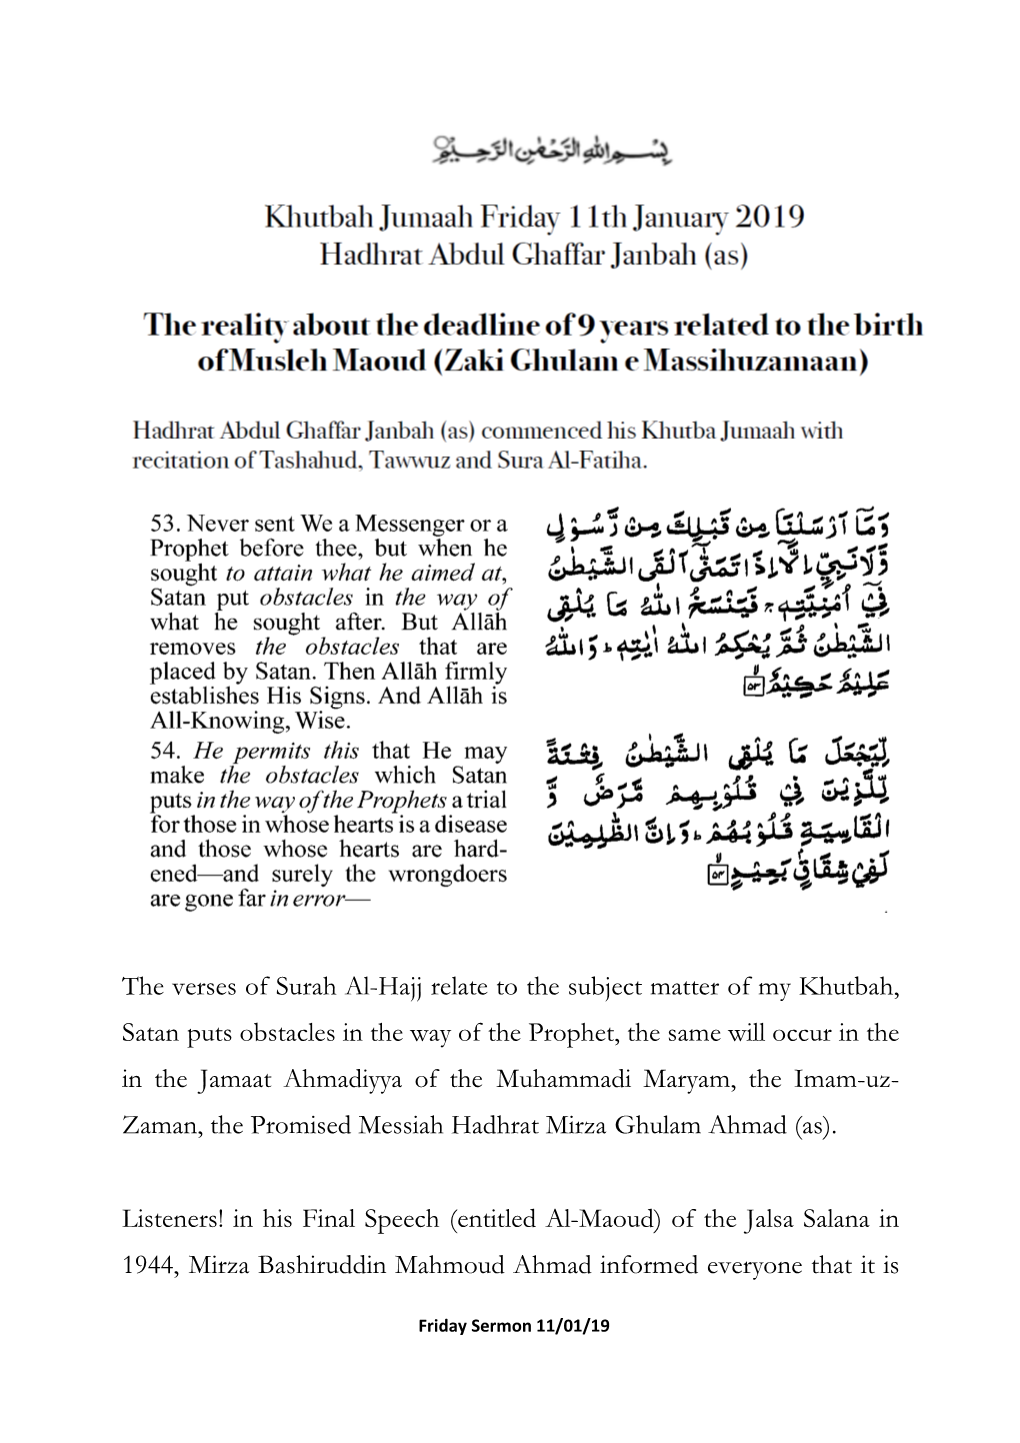 The Verses of Surah Al-Hajj Relate to the Subject Matter of My Khutbah